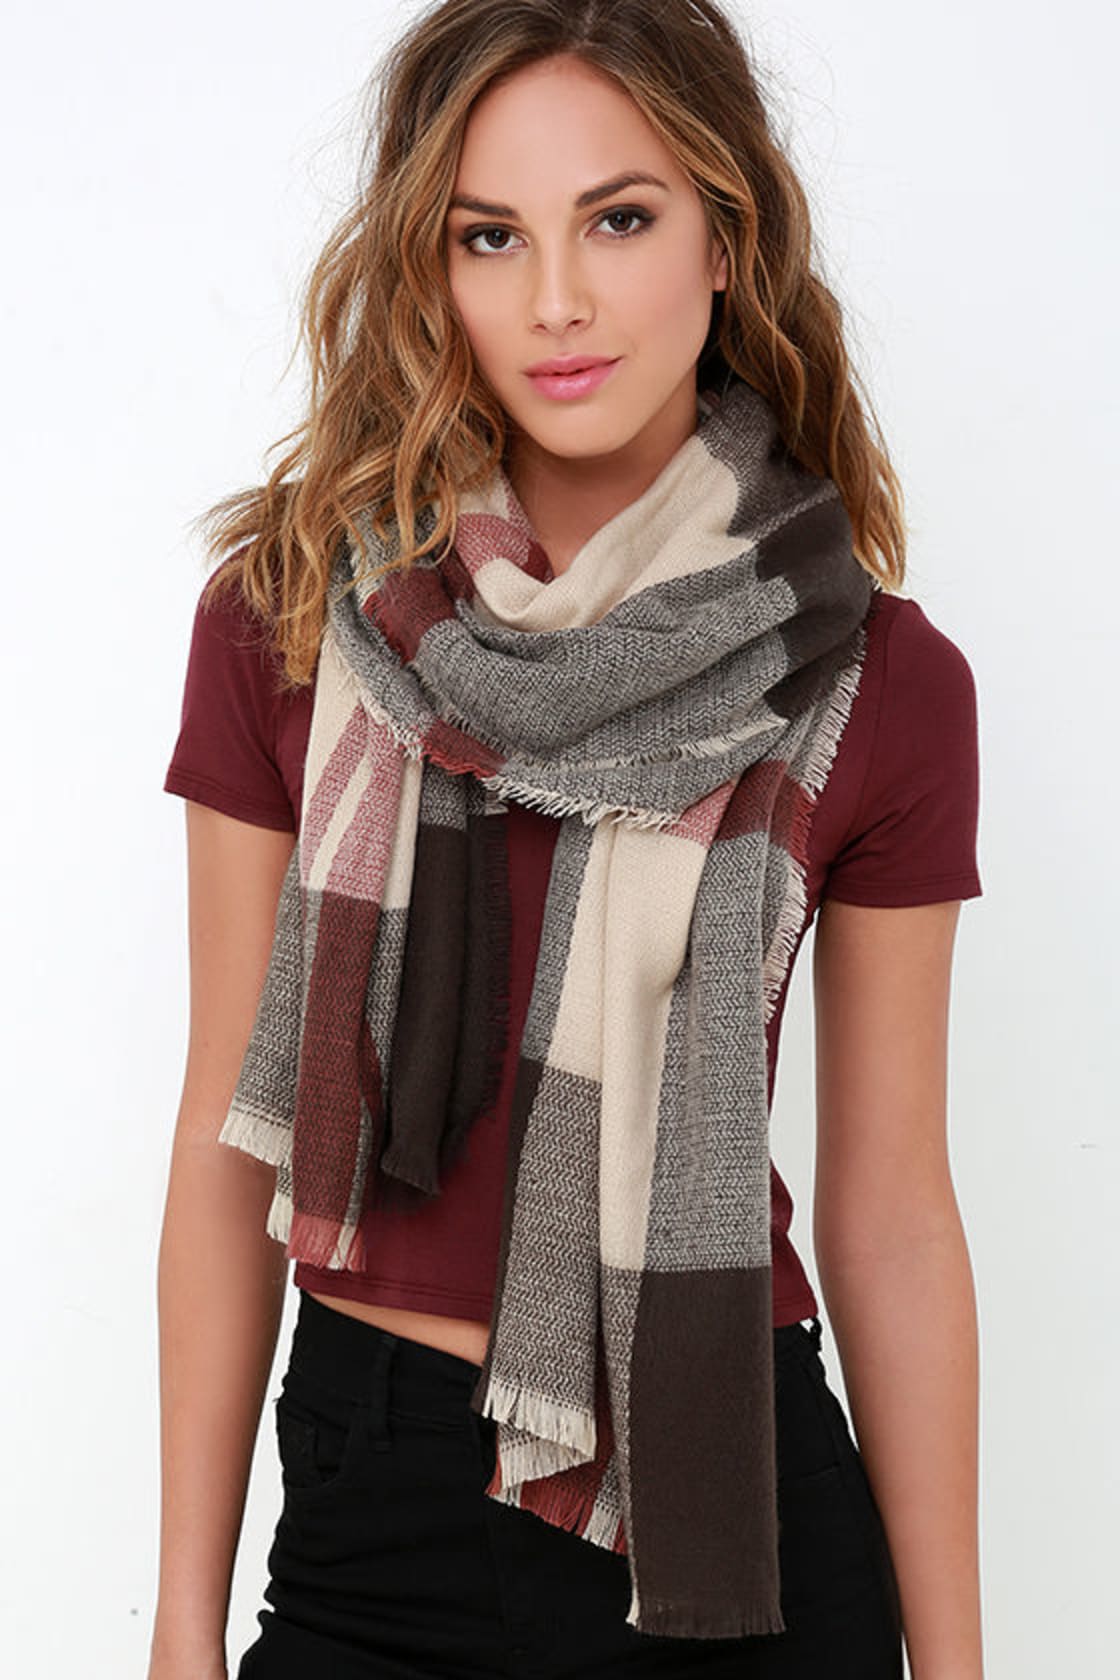 Cute Beige and Brown Scarf - Plaid Scarf - Woven Scarf - $16.00 - Lulus